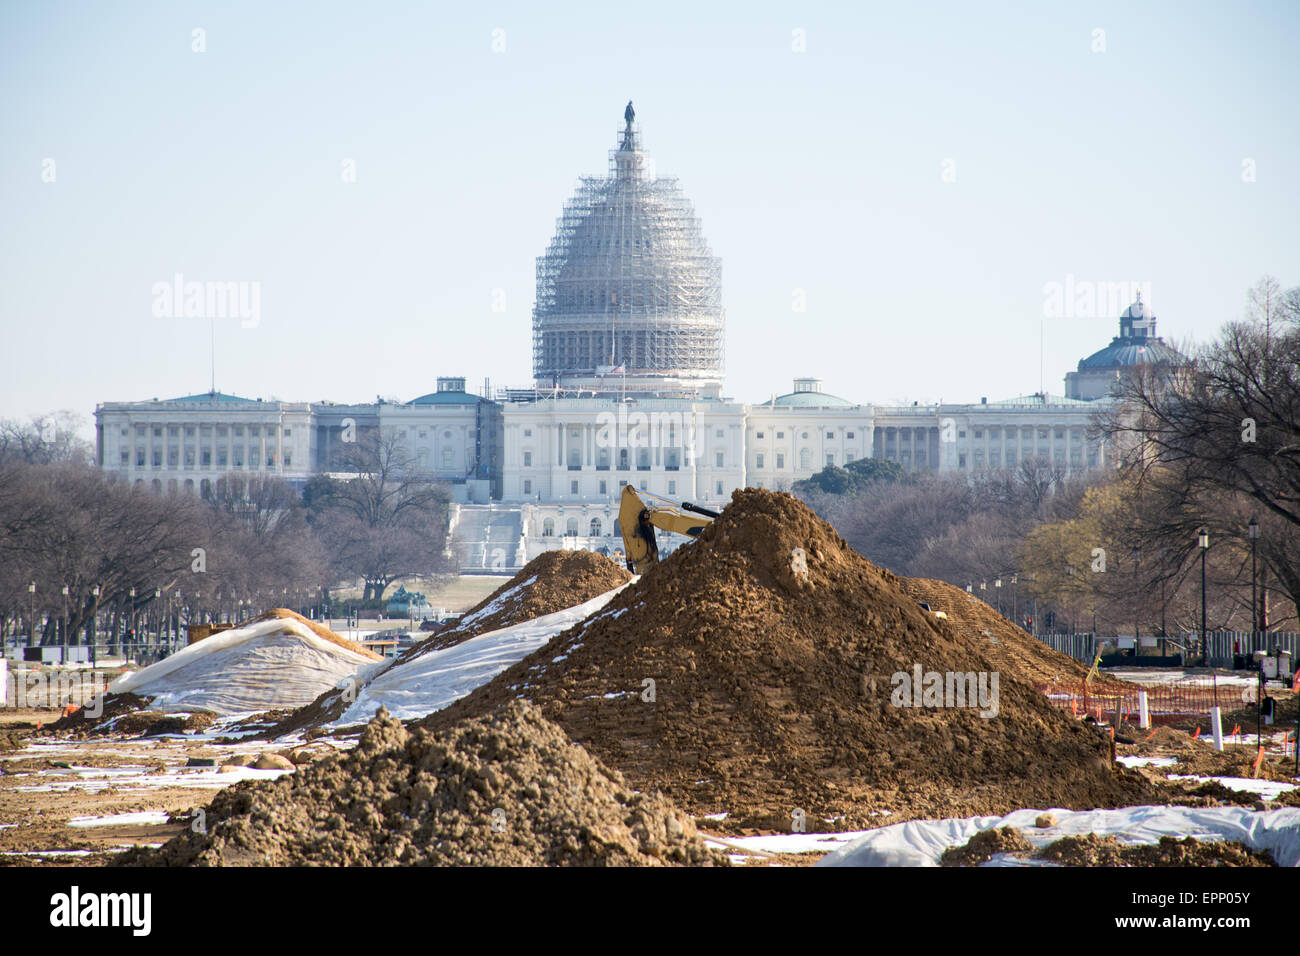 WASHINGTON DC, USA - Renovations on a section of the eastern end of the National Mall in Washington DC, with the dome of the U.S. Capitol Building in the background covered in scaffolding as it undergoes its own repairs. Stock Photo